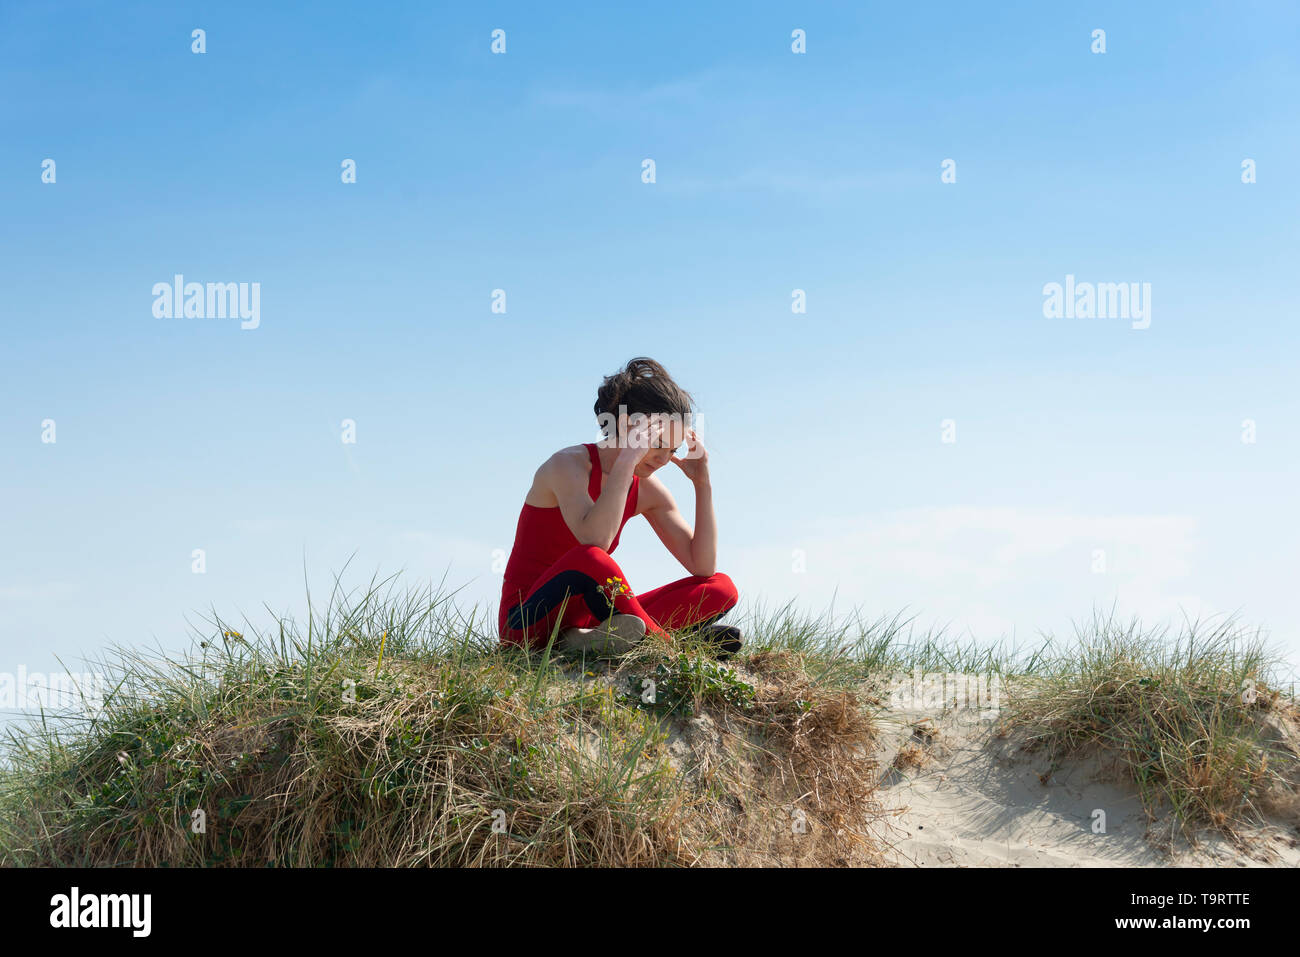 woman athete sitting psyching herself up before a competition. Stock Photo